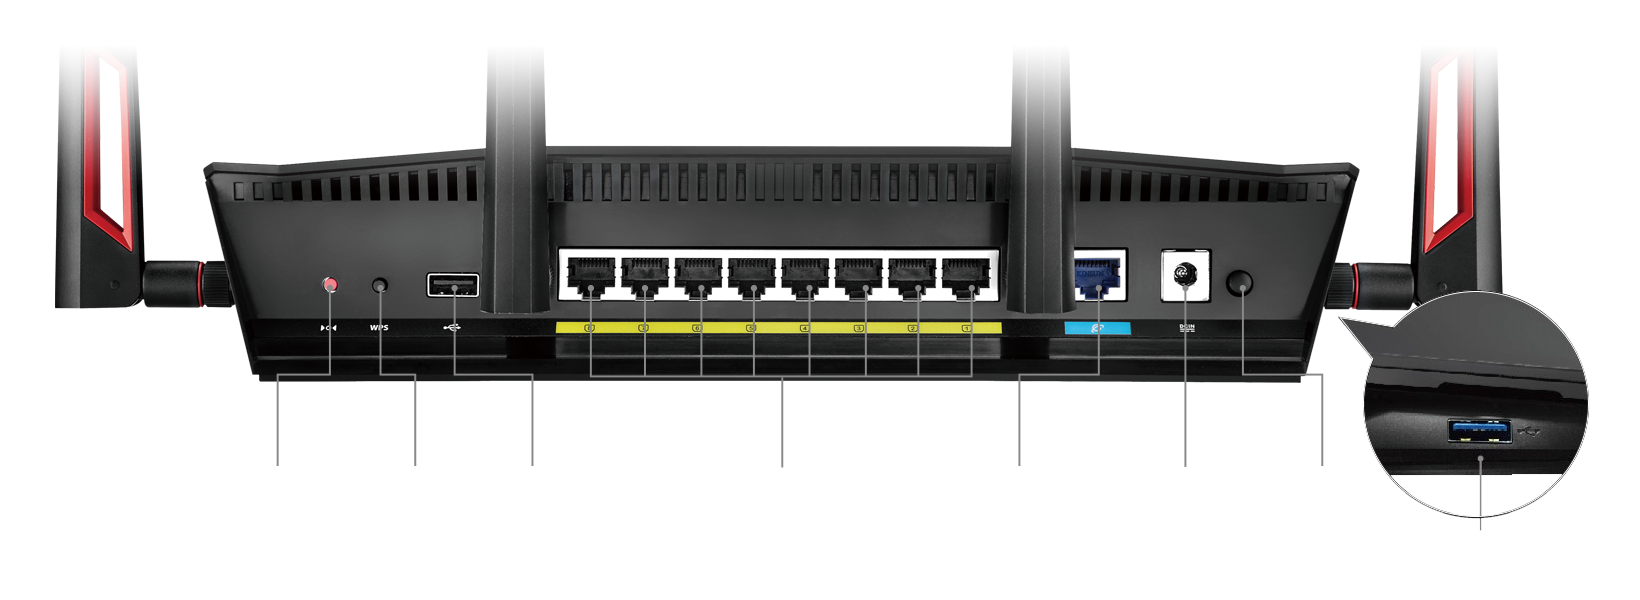 8 Gigabit LAN ports — twice the number most routers provide — making RT-AC88U your digital home hub